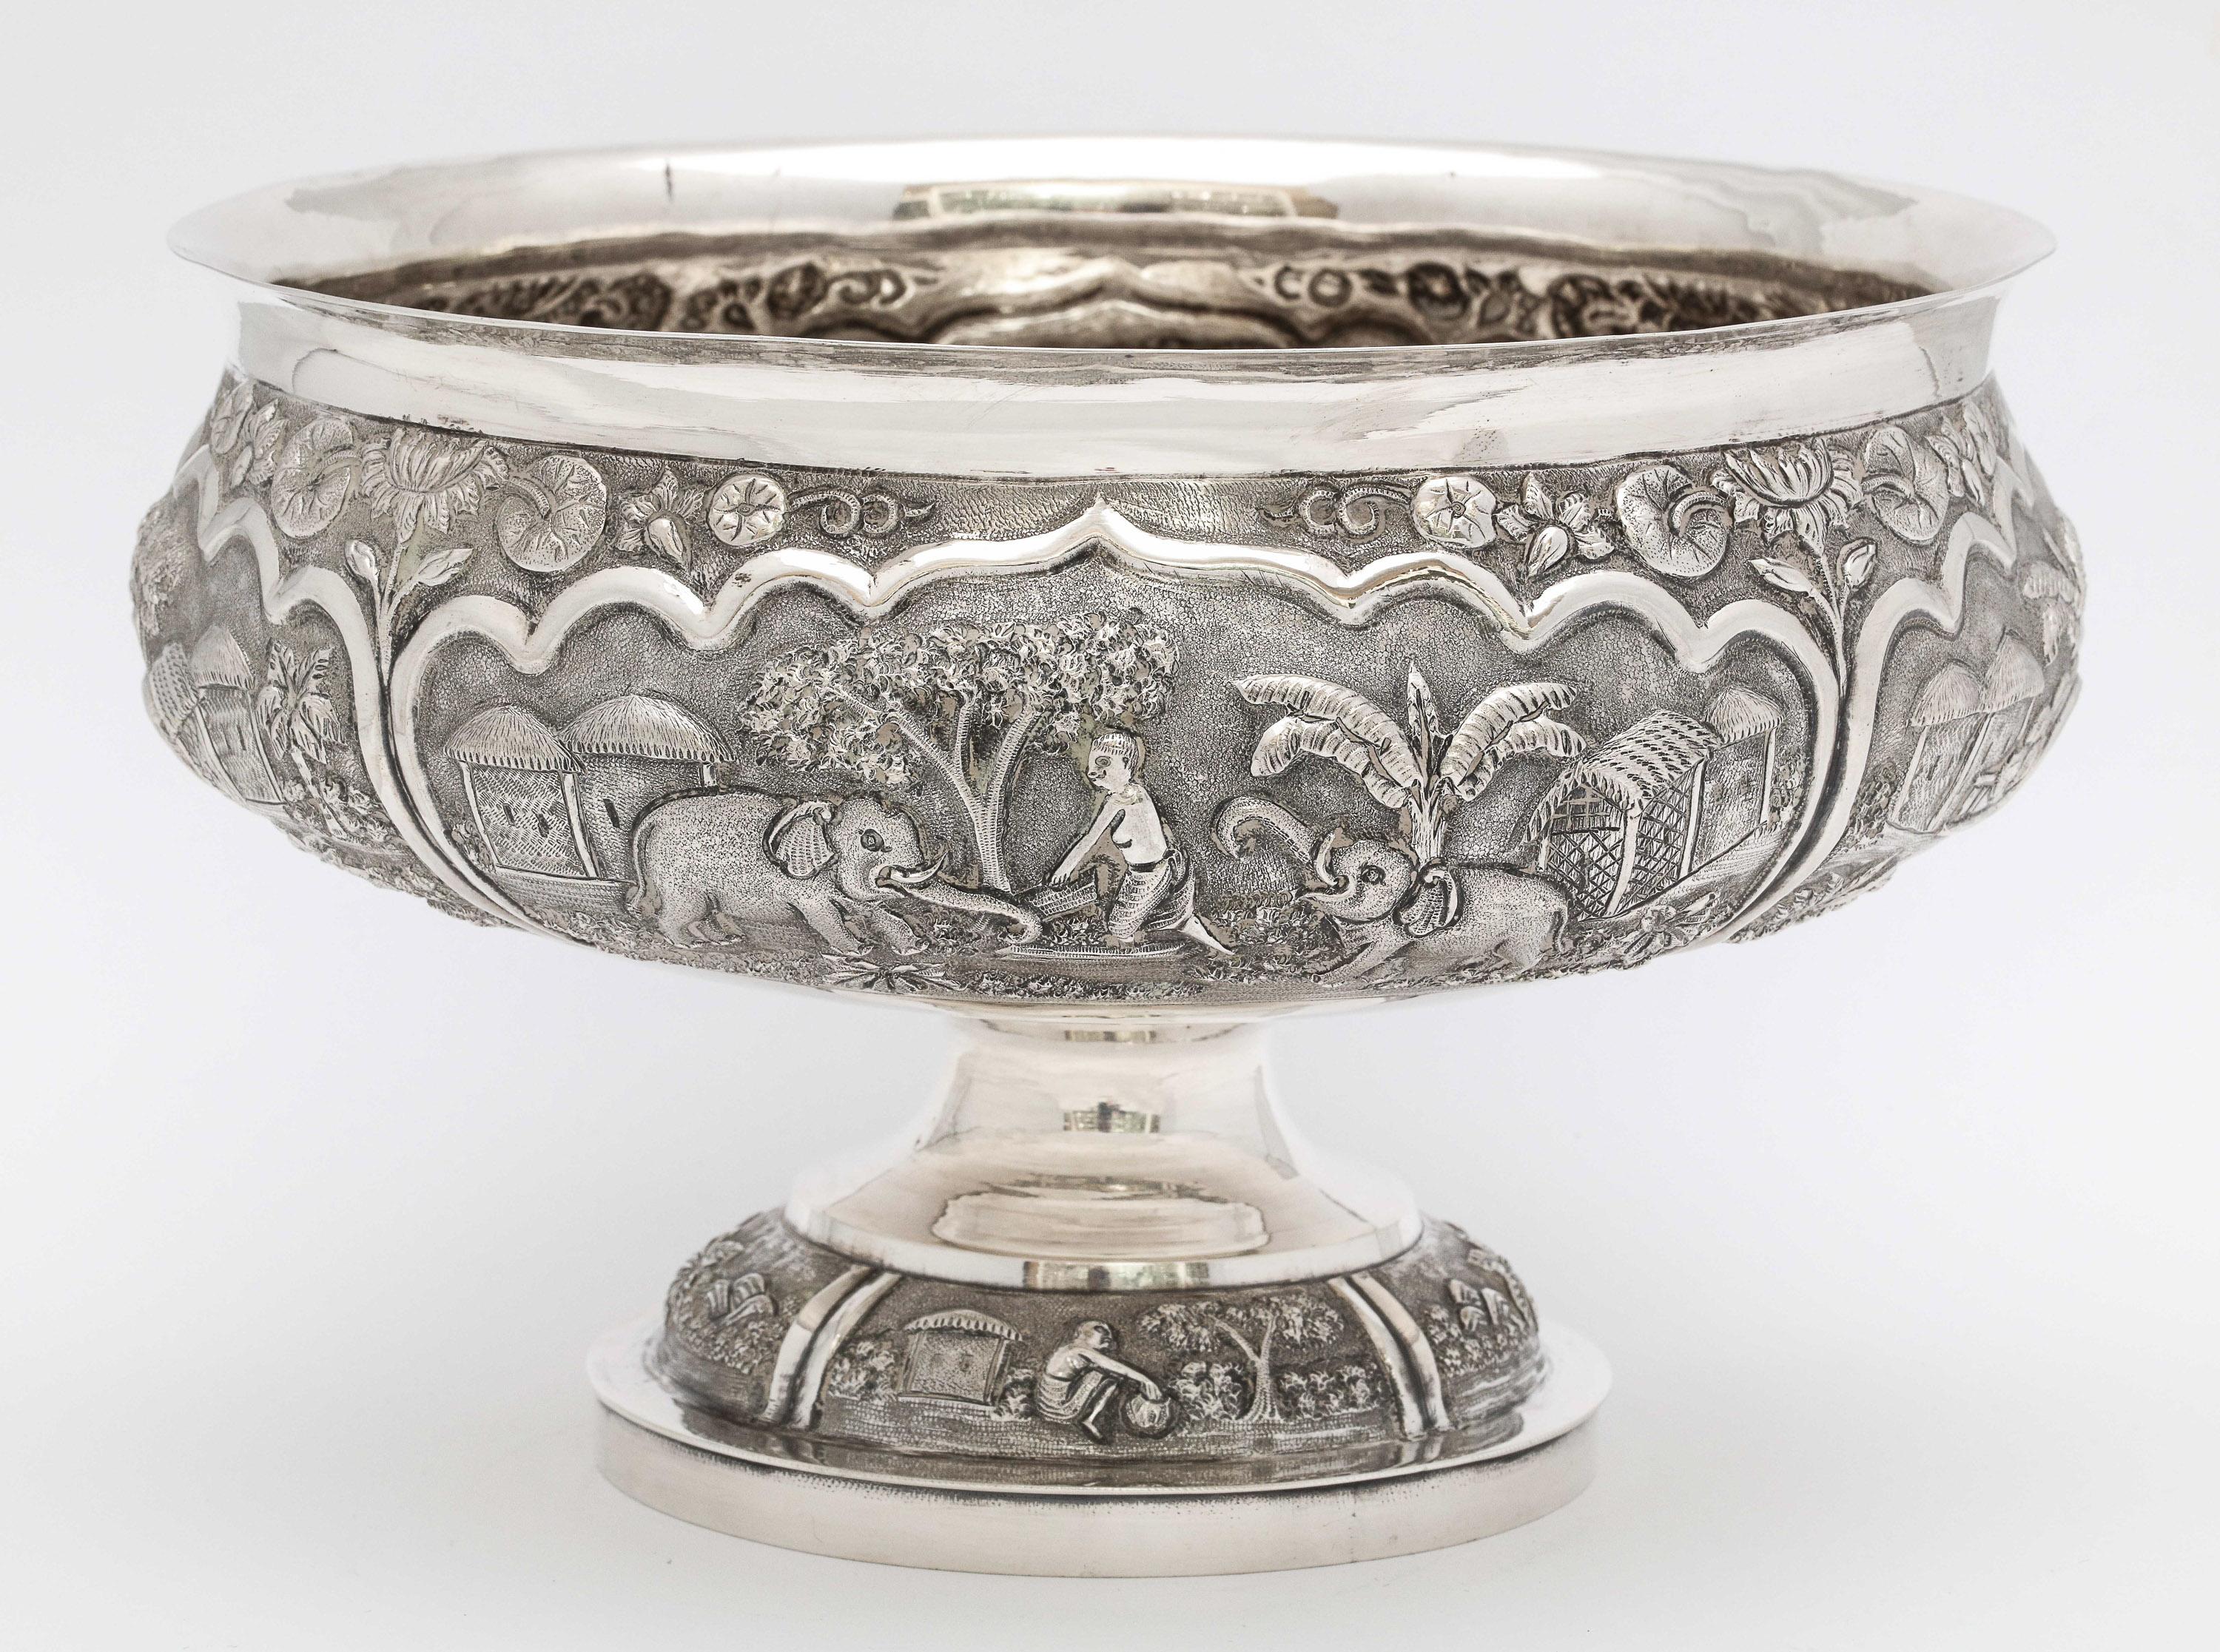 Late 19th century, (.800) silver, pedestal-based bowl, Burma/Myanmar, circa 1895. Silver is unmarked, but tested. The bowl measures 5 1/4 inches high x over 7 1/2 inches diameter. Weighs 18.995 troy ounces. Decorated in high-relief, with country